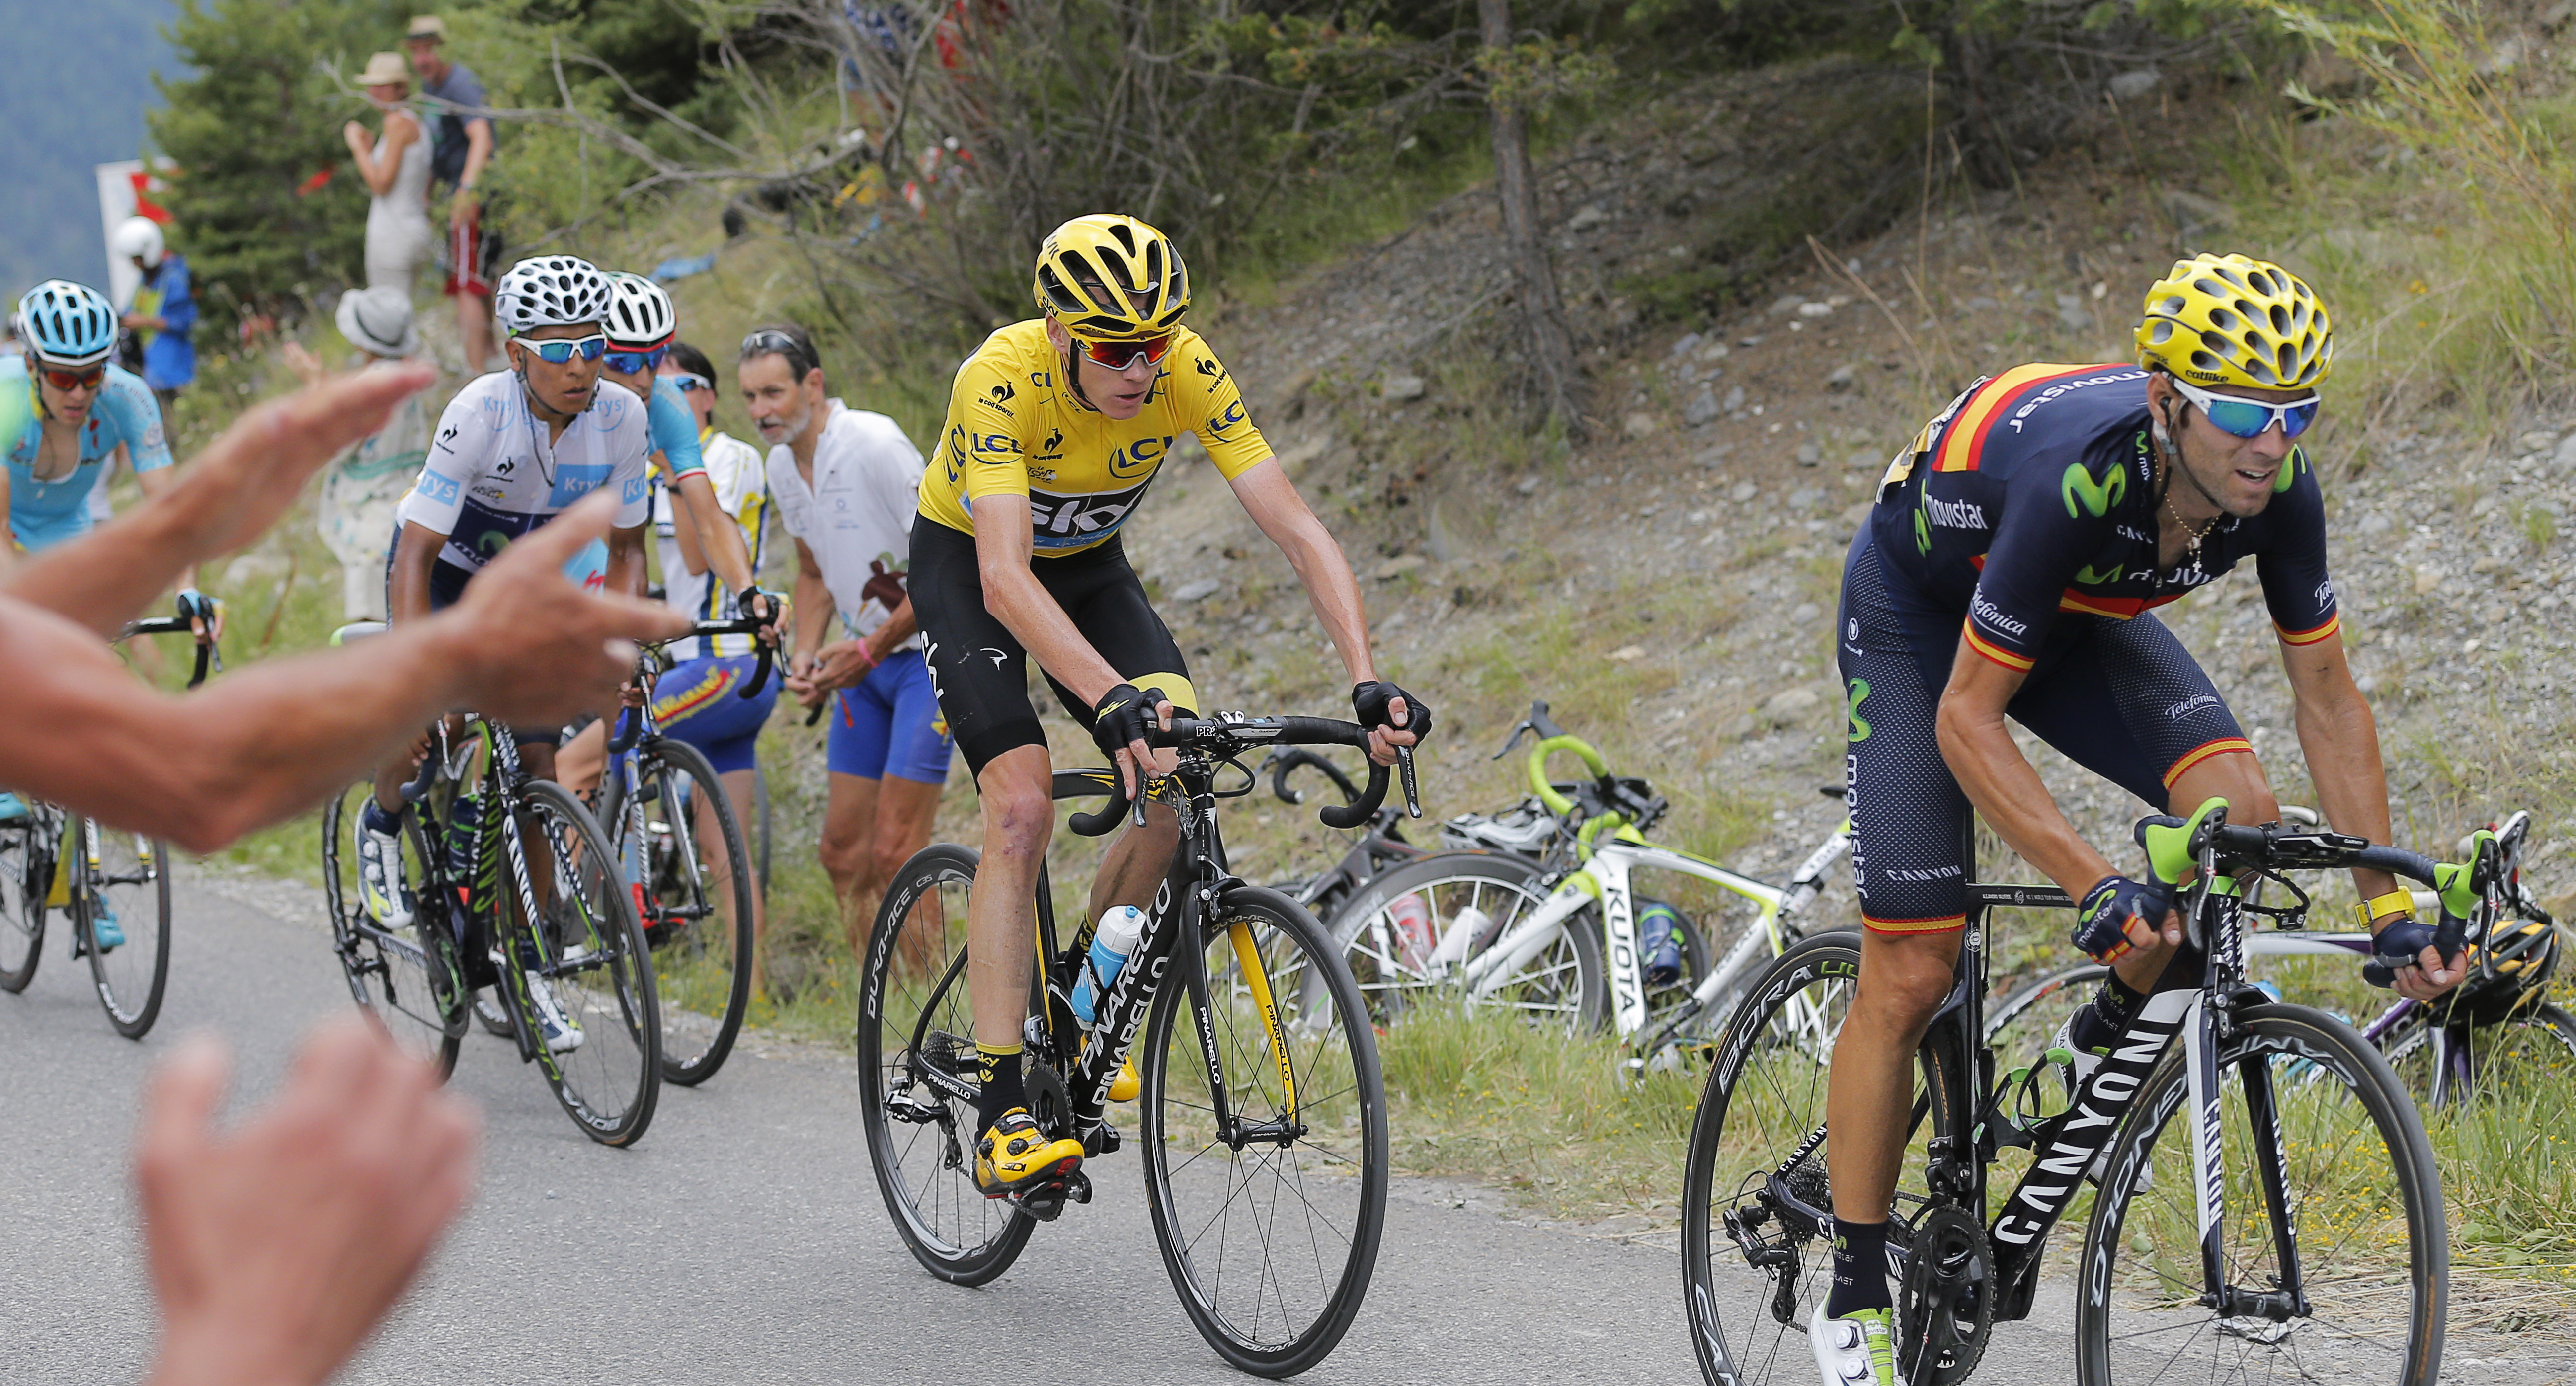 Spain's Alejandro Valverde, right, Britain's Chris Froome, wearing the overall leader's yellow jersey, and Colombia's Nairo Quintana, wearing the best young rider's white jersey, ride during the seventeenth stage. Photo: AP